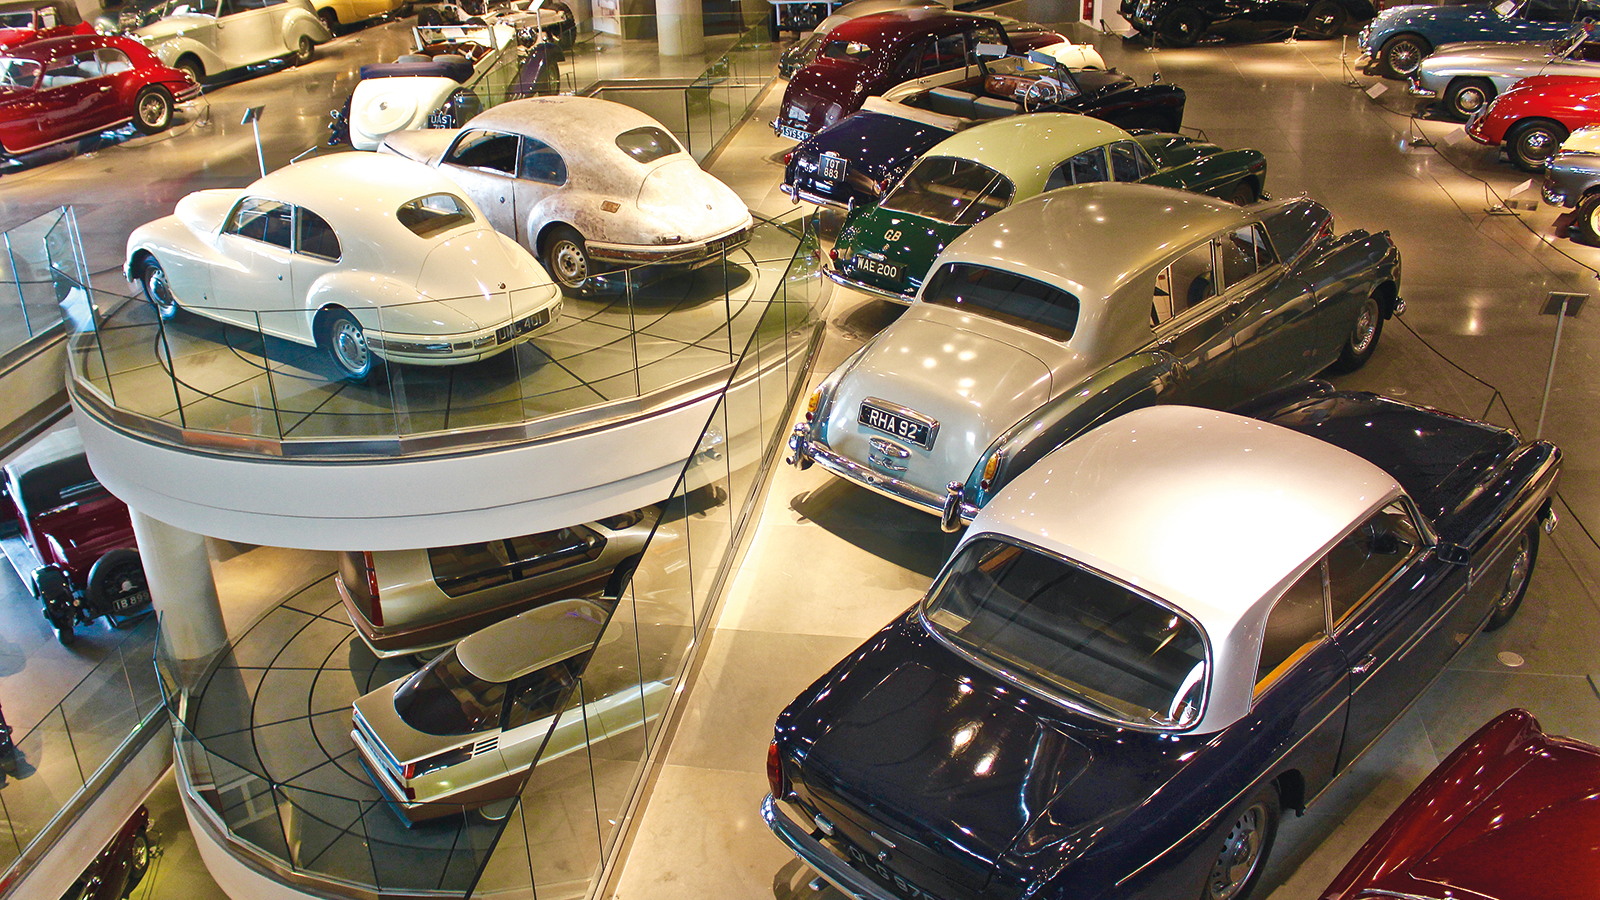 Vauxhall Corsa becomes surprising addition to museum's collection